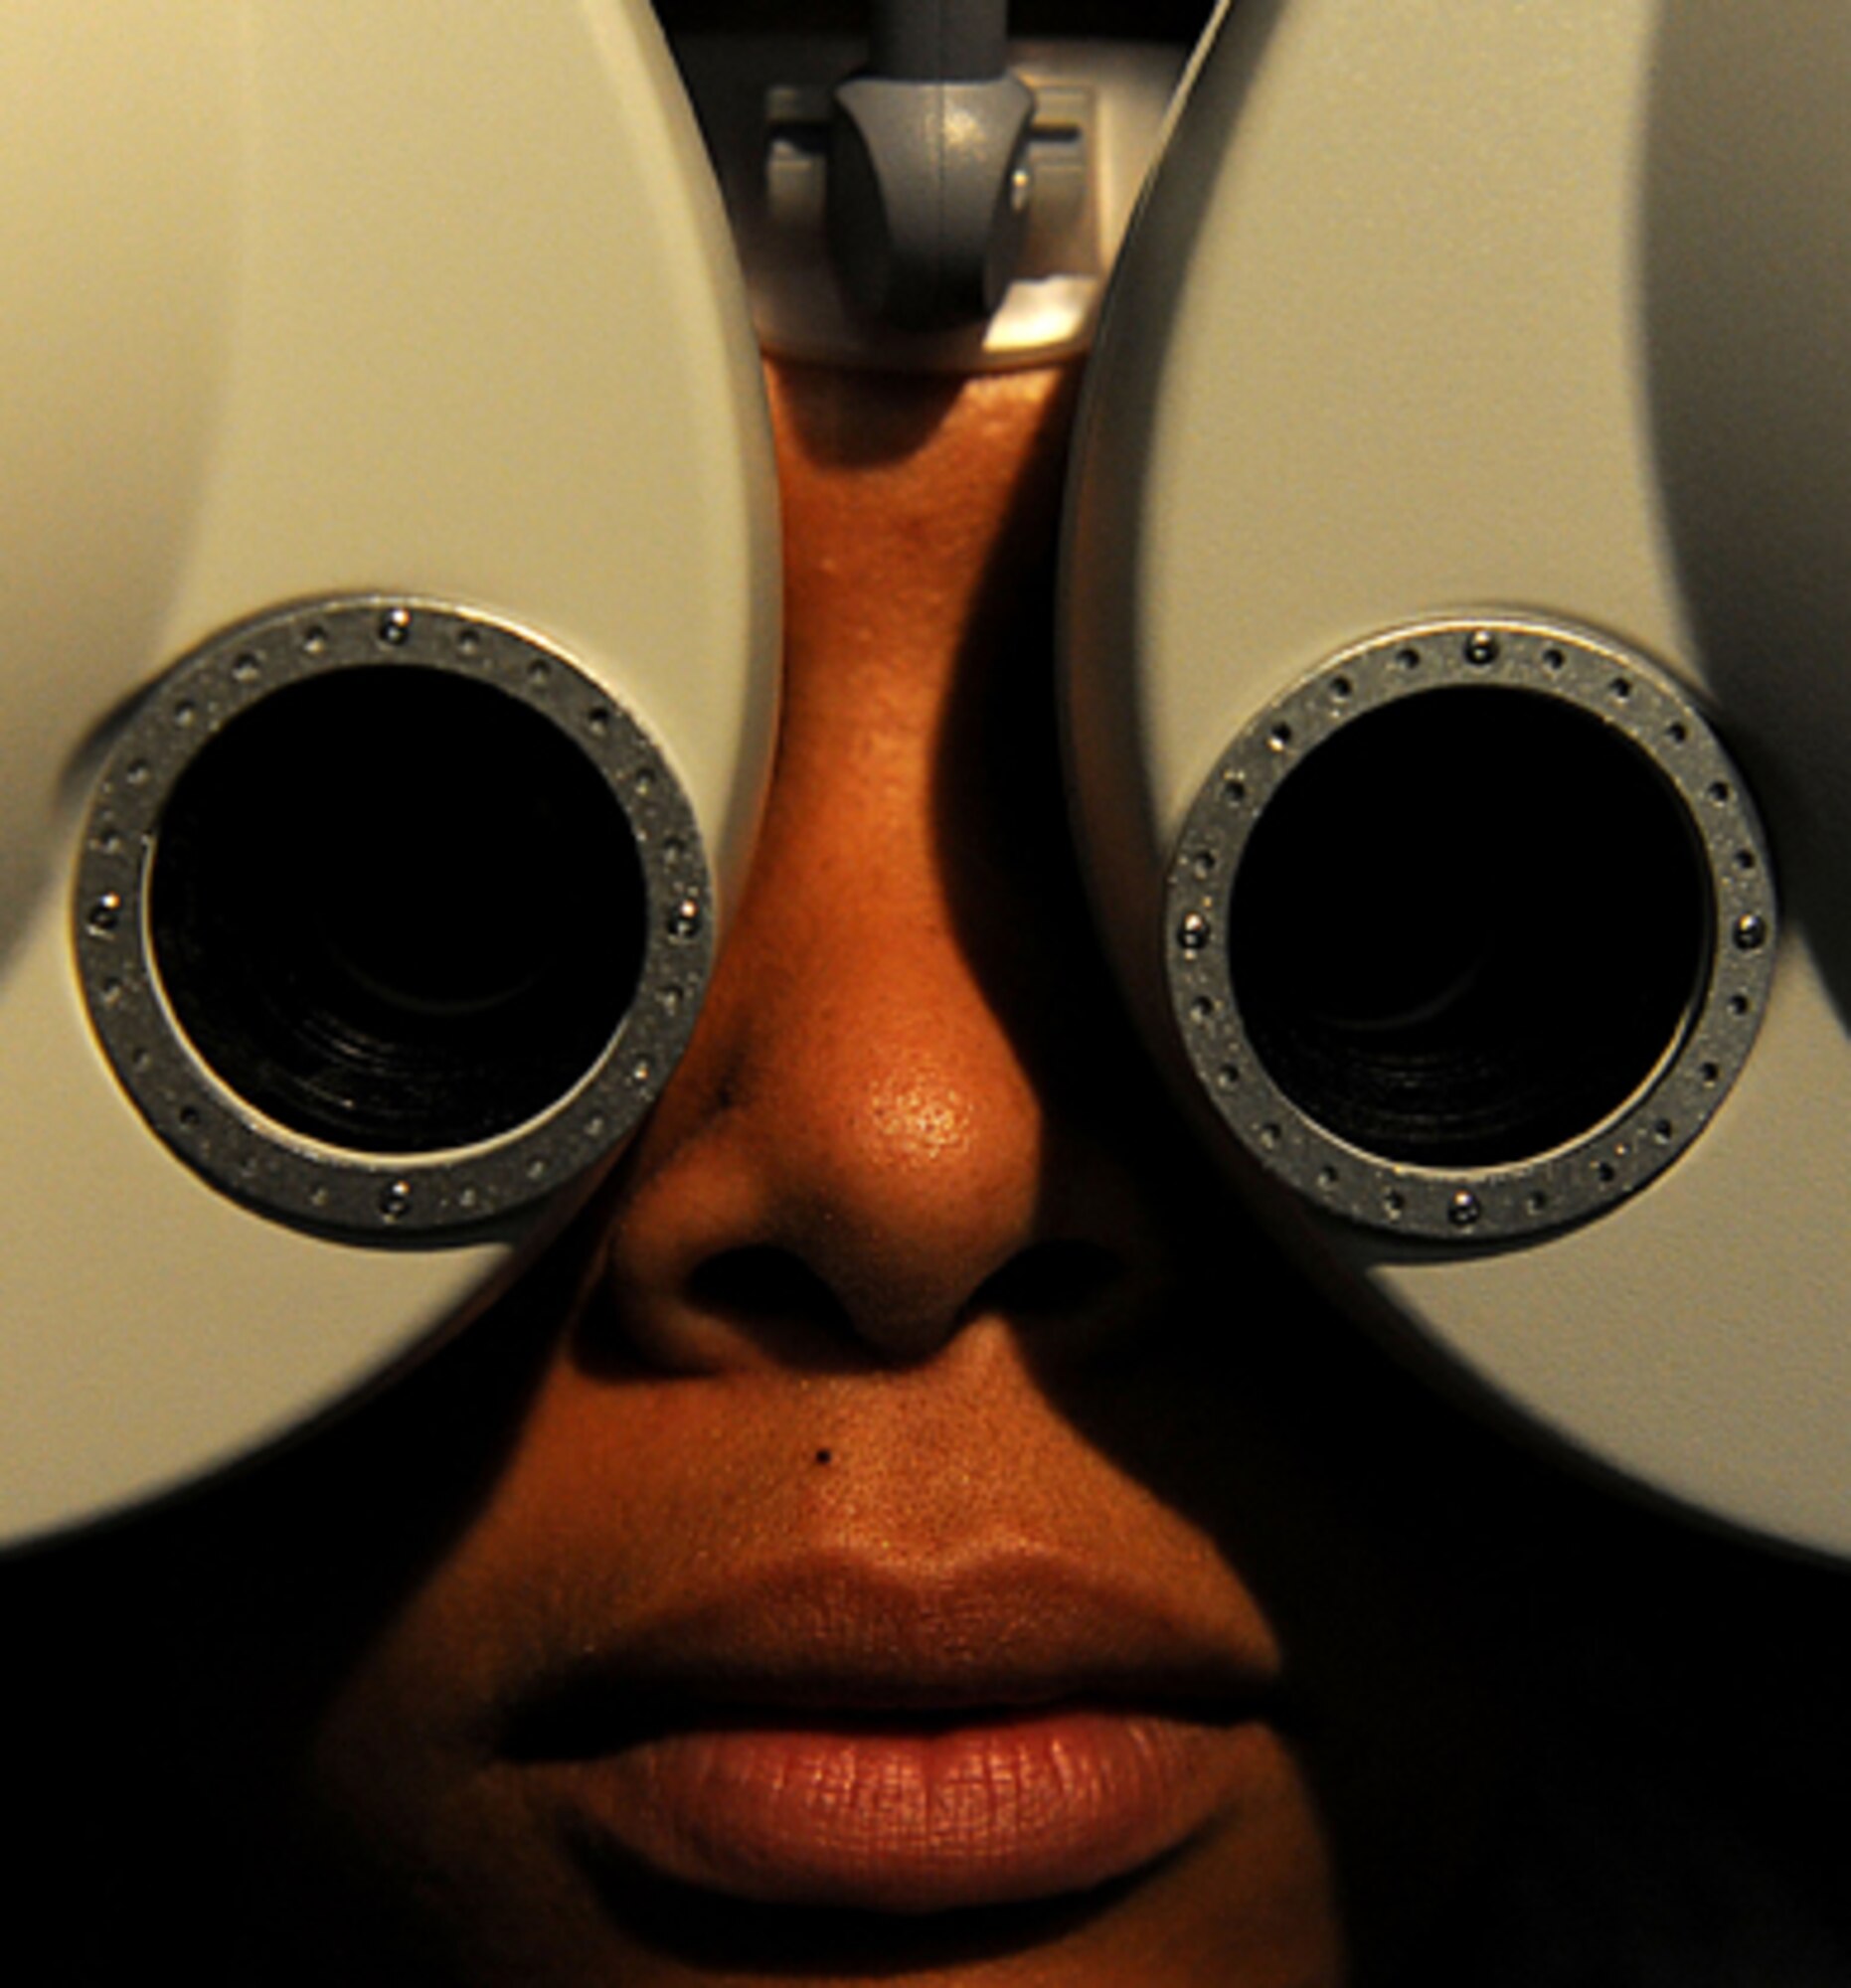 U.S. Air Force Staff Sgt. Suzette Skrecz, 18th Medical Support Squadron medical readiness technician, looks into a phoropter at the optometry clinic at Kadena Air Base Japan, Oct. 13, 2011. A phoropter is used to find the correct prescription for  a set of eyes by switching through different possibilities while the patient reads an eye chart on the other side of the room.  (U.S. Air Force photo by Airman 1st Class Brooke P. Beers/Released)